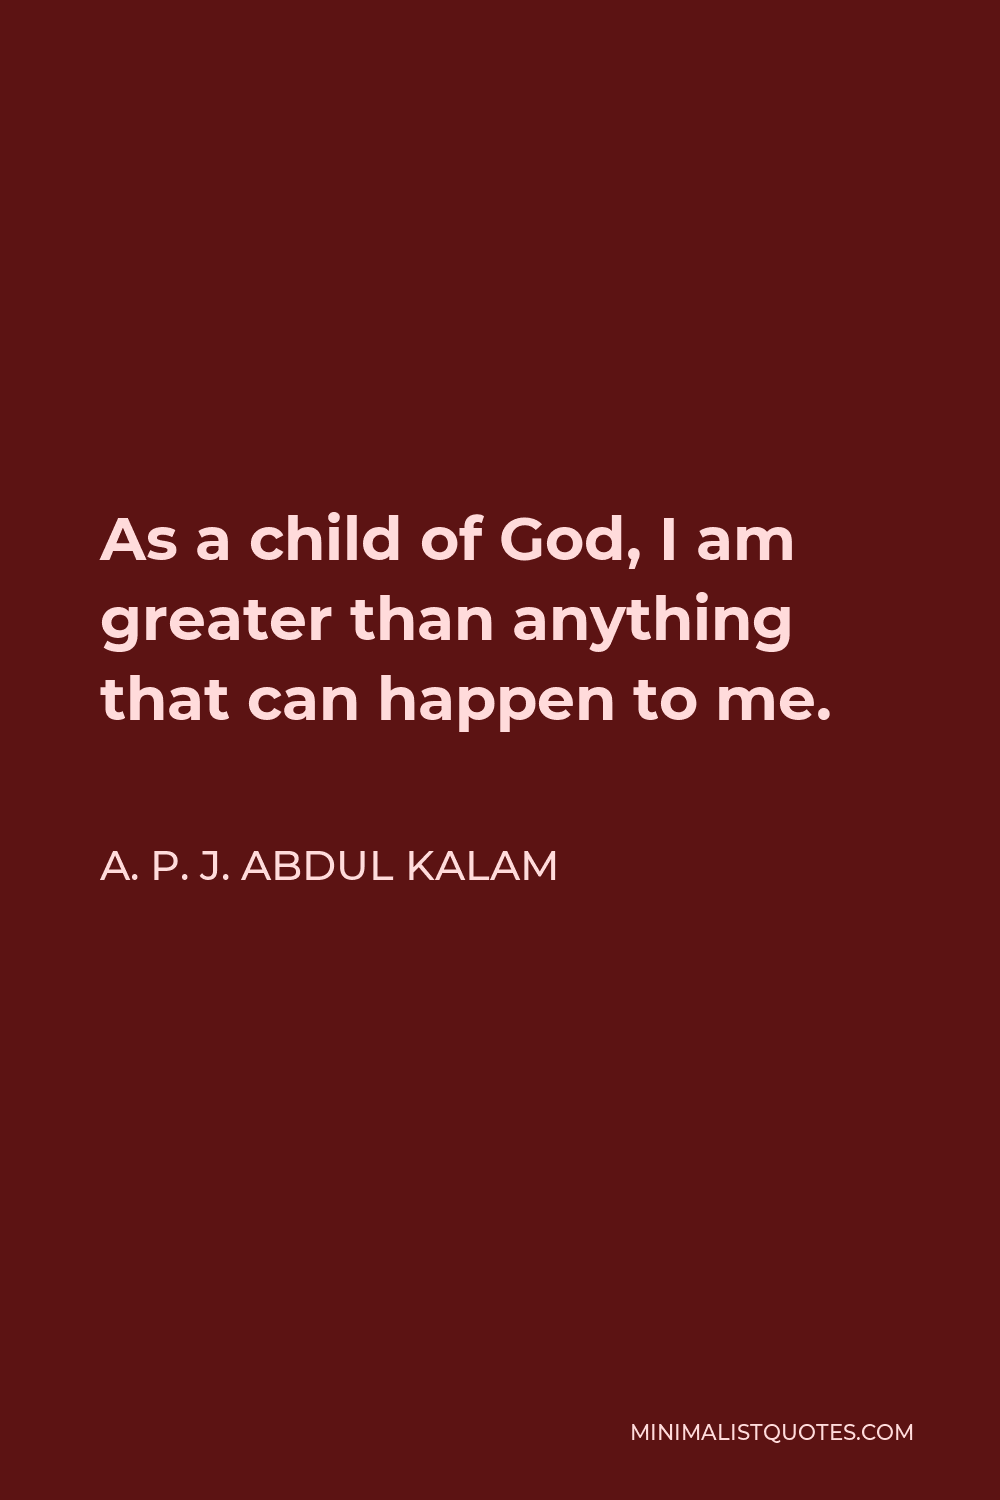 A. P. J. Abdul Kalam Quote - As a child of God, I am greater than anything that can happen to me.